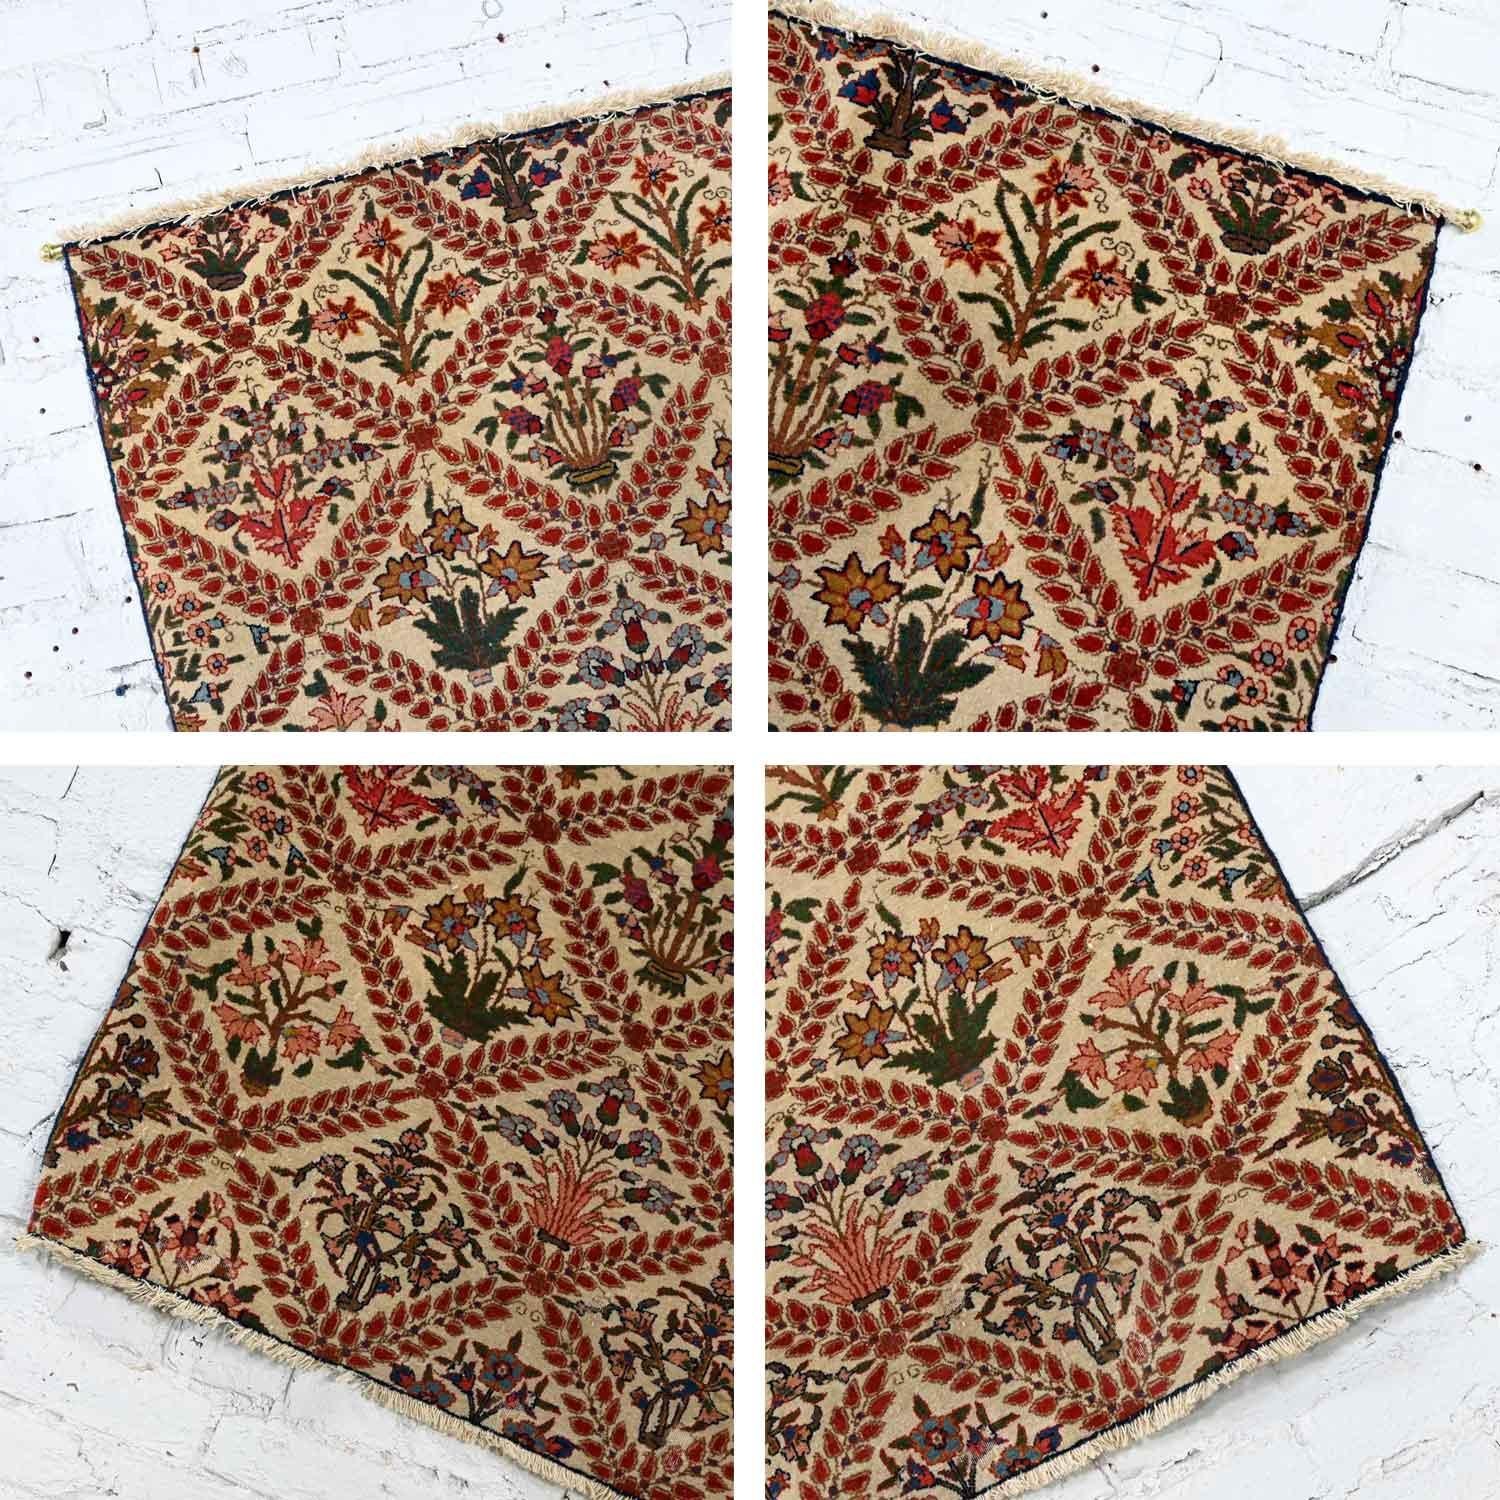 Antique Persian Oriental Hand Woven Wool & Cotton Leaf & Floral Rug Wall Hanging In Good Condition For Sale In Topeka, KS